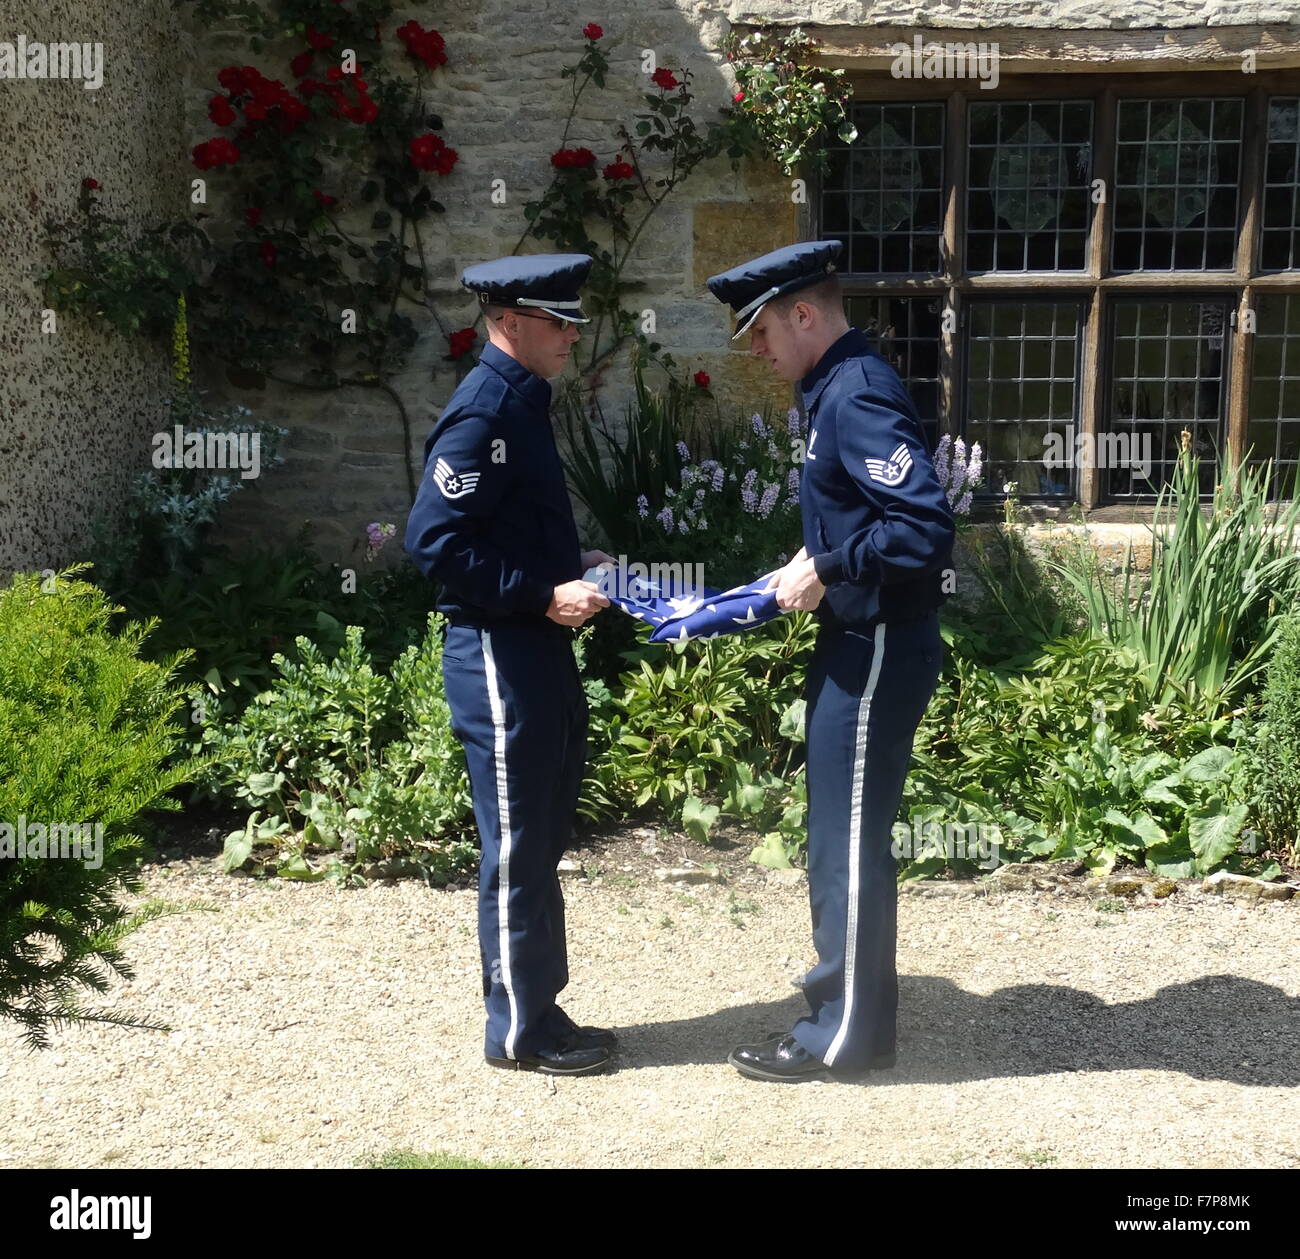 Flag lowering ceremony by US Air force servicemen at Sulgrave Manor, England, ancestral home of George Washington. 2015 Stock Photo